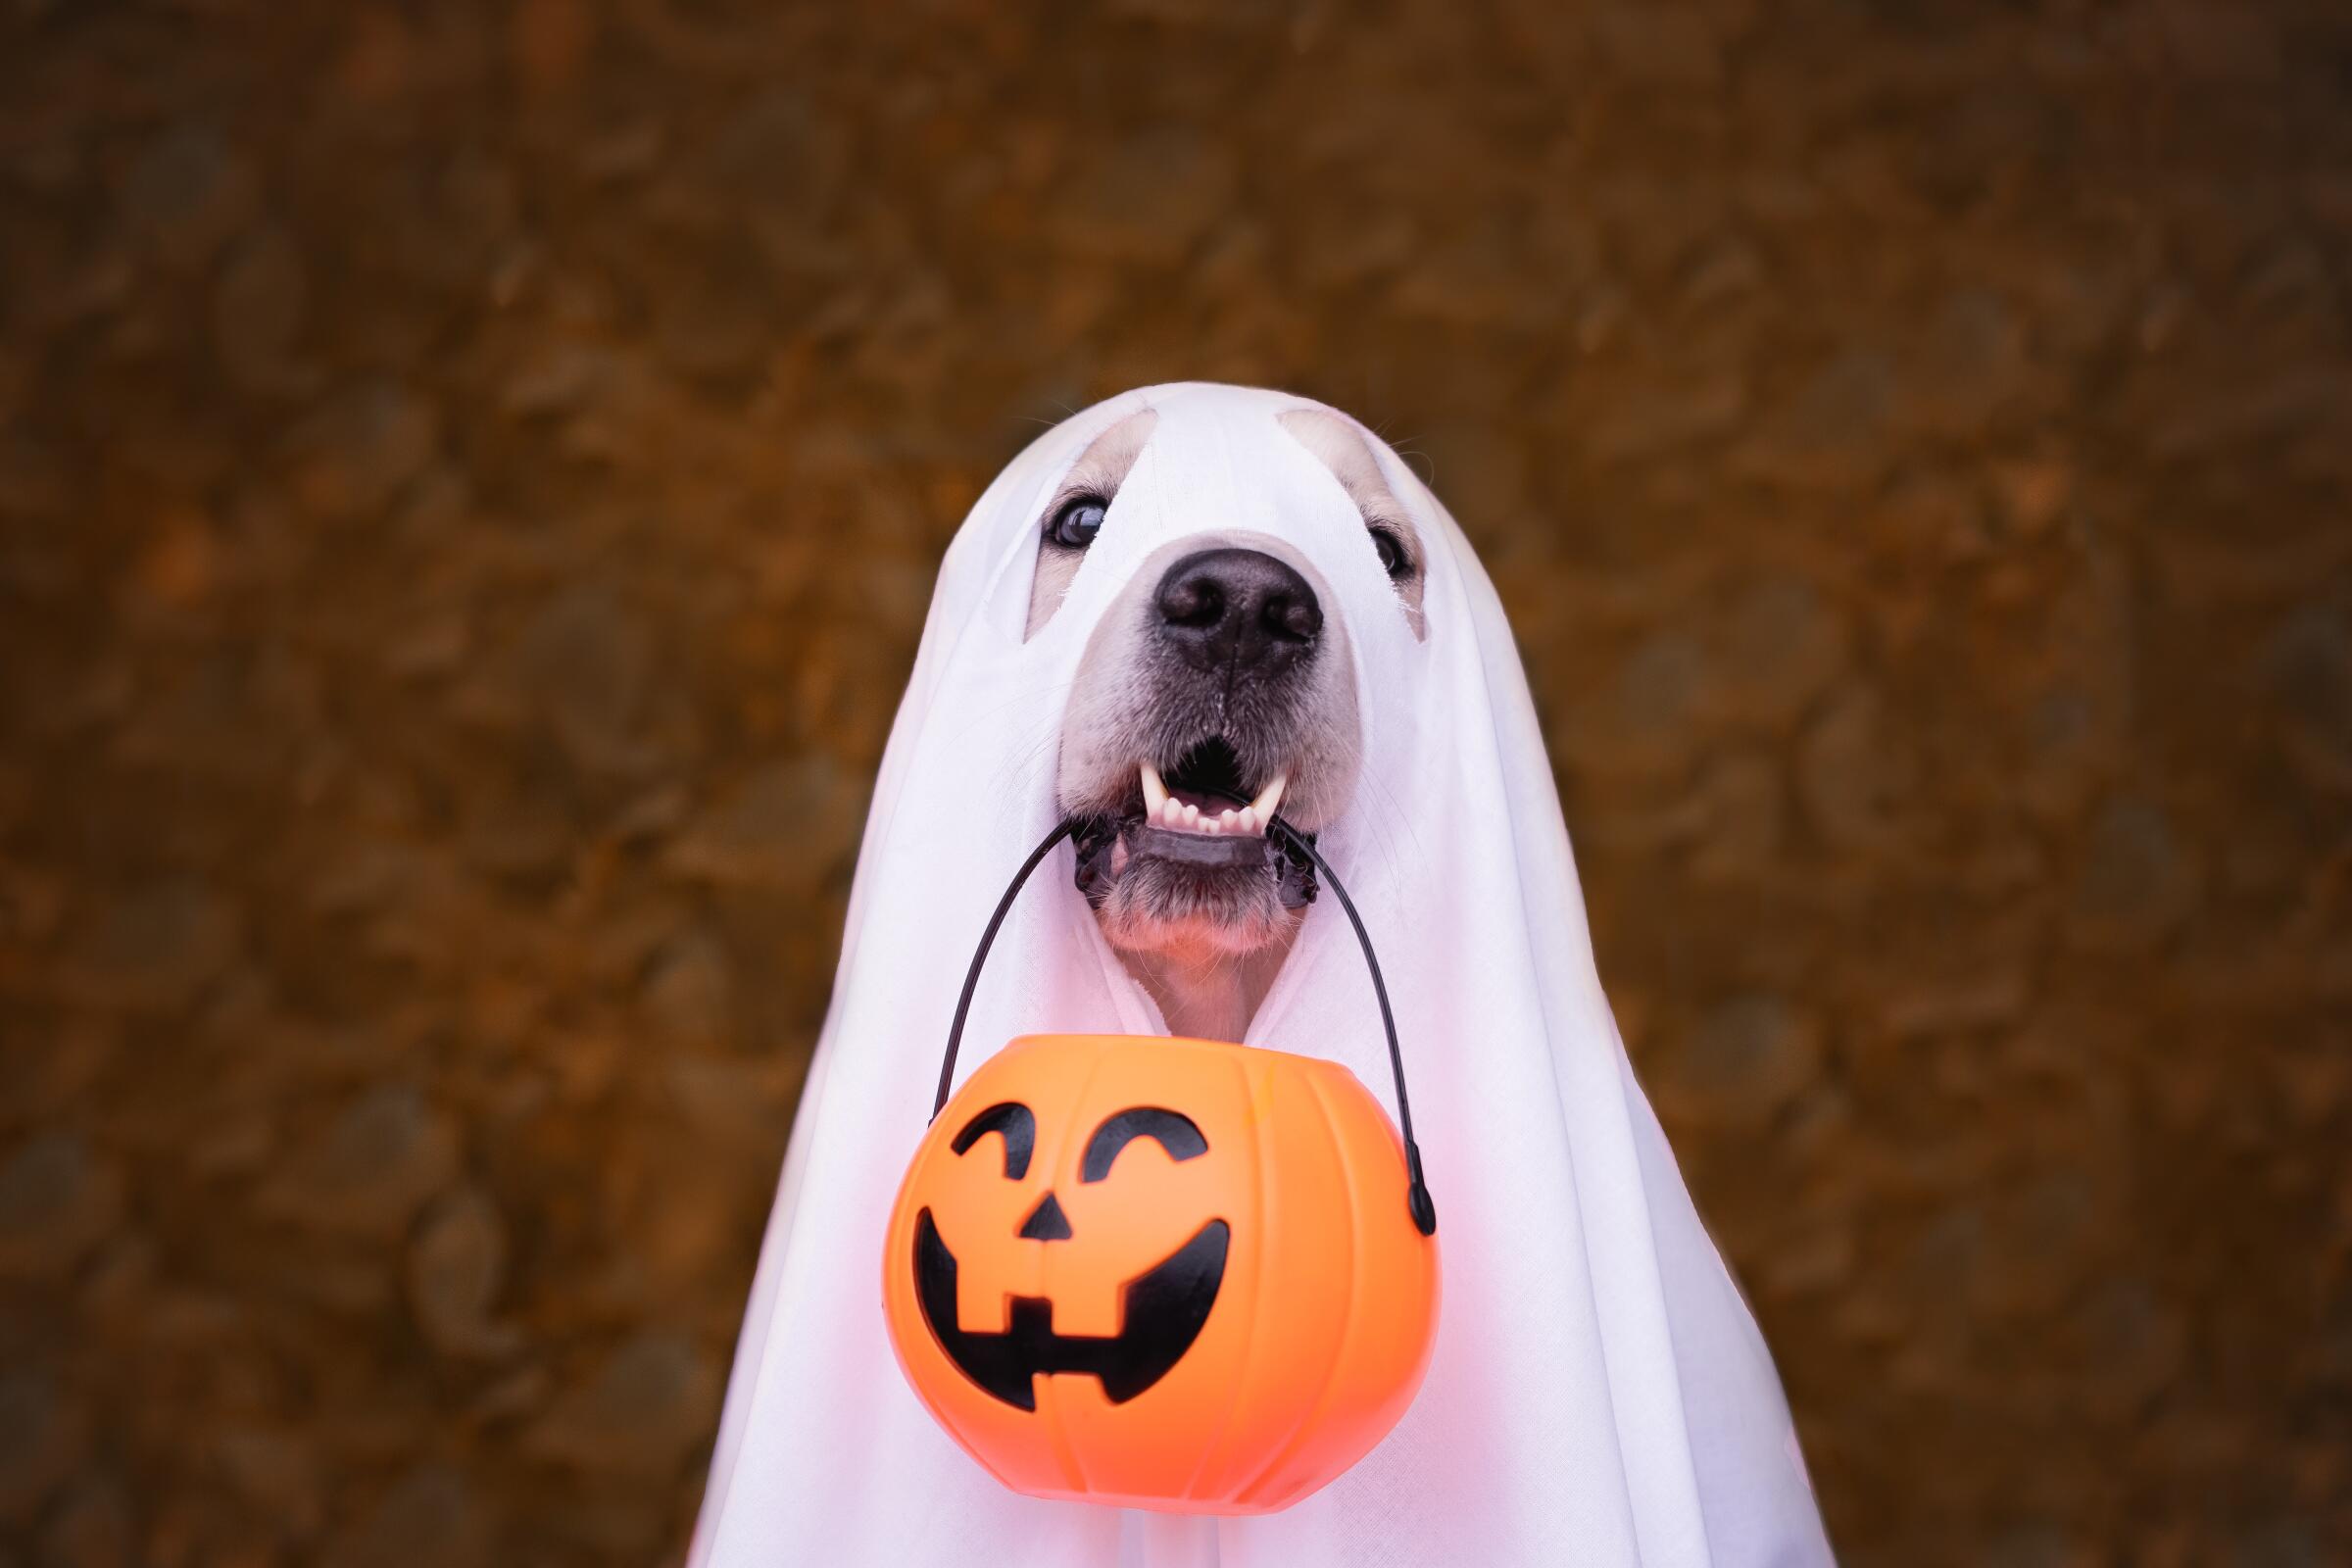 Looking for a last-minute costume idea? Here's how to turn your pup into a ghost.